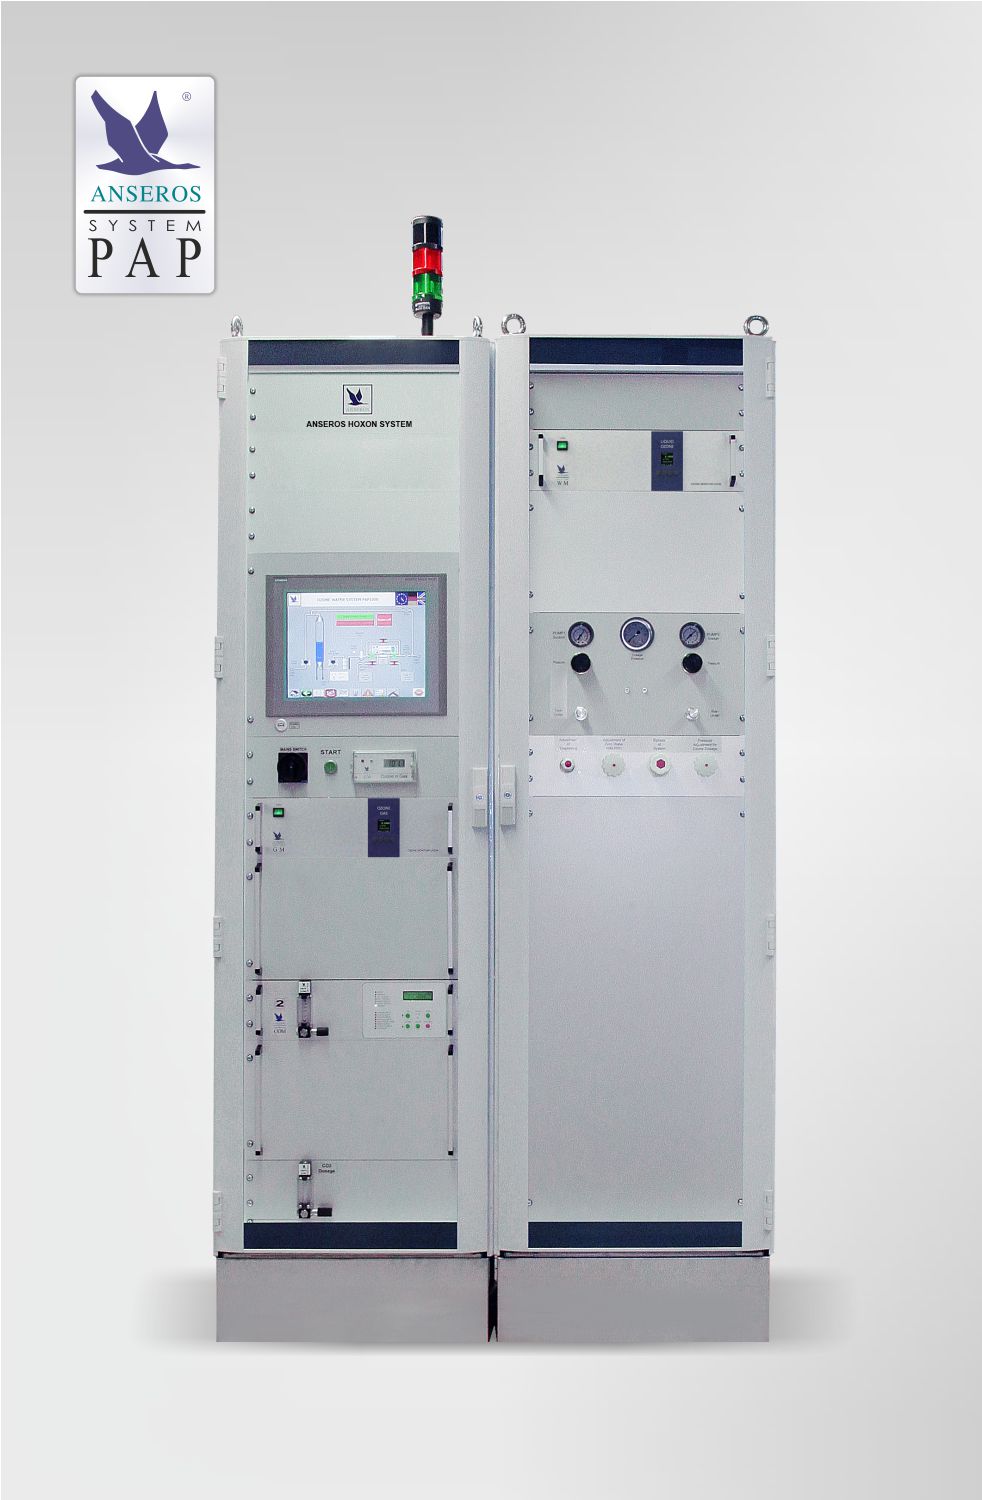 ANSEROS ozone water system PAP SC 2000